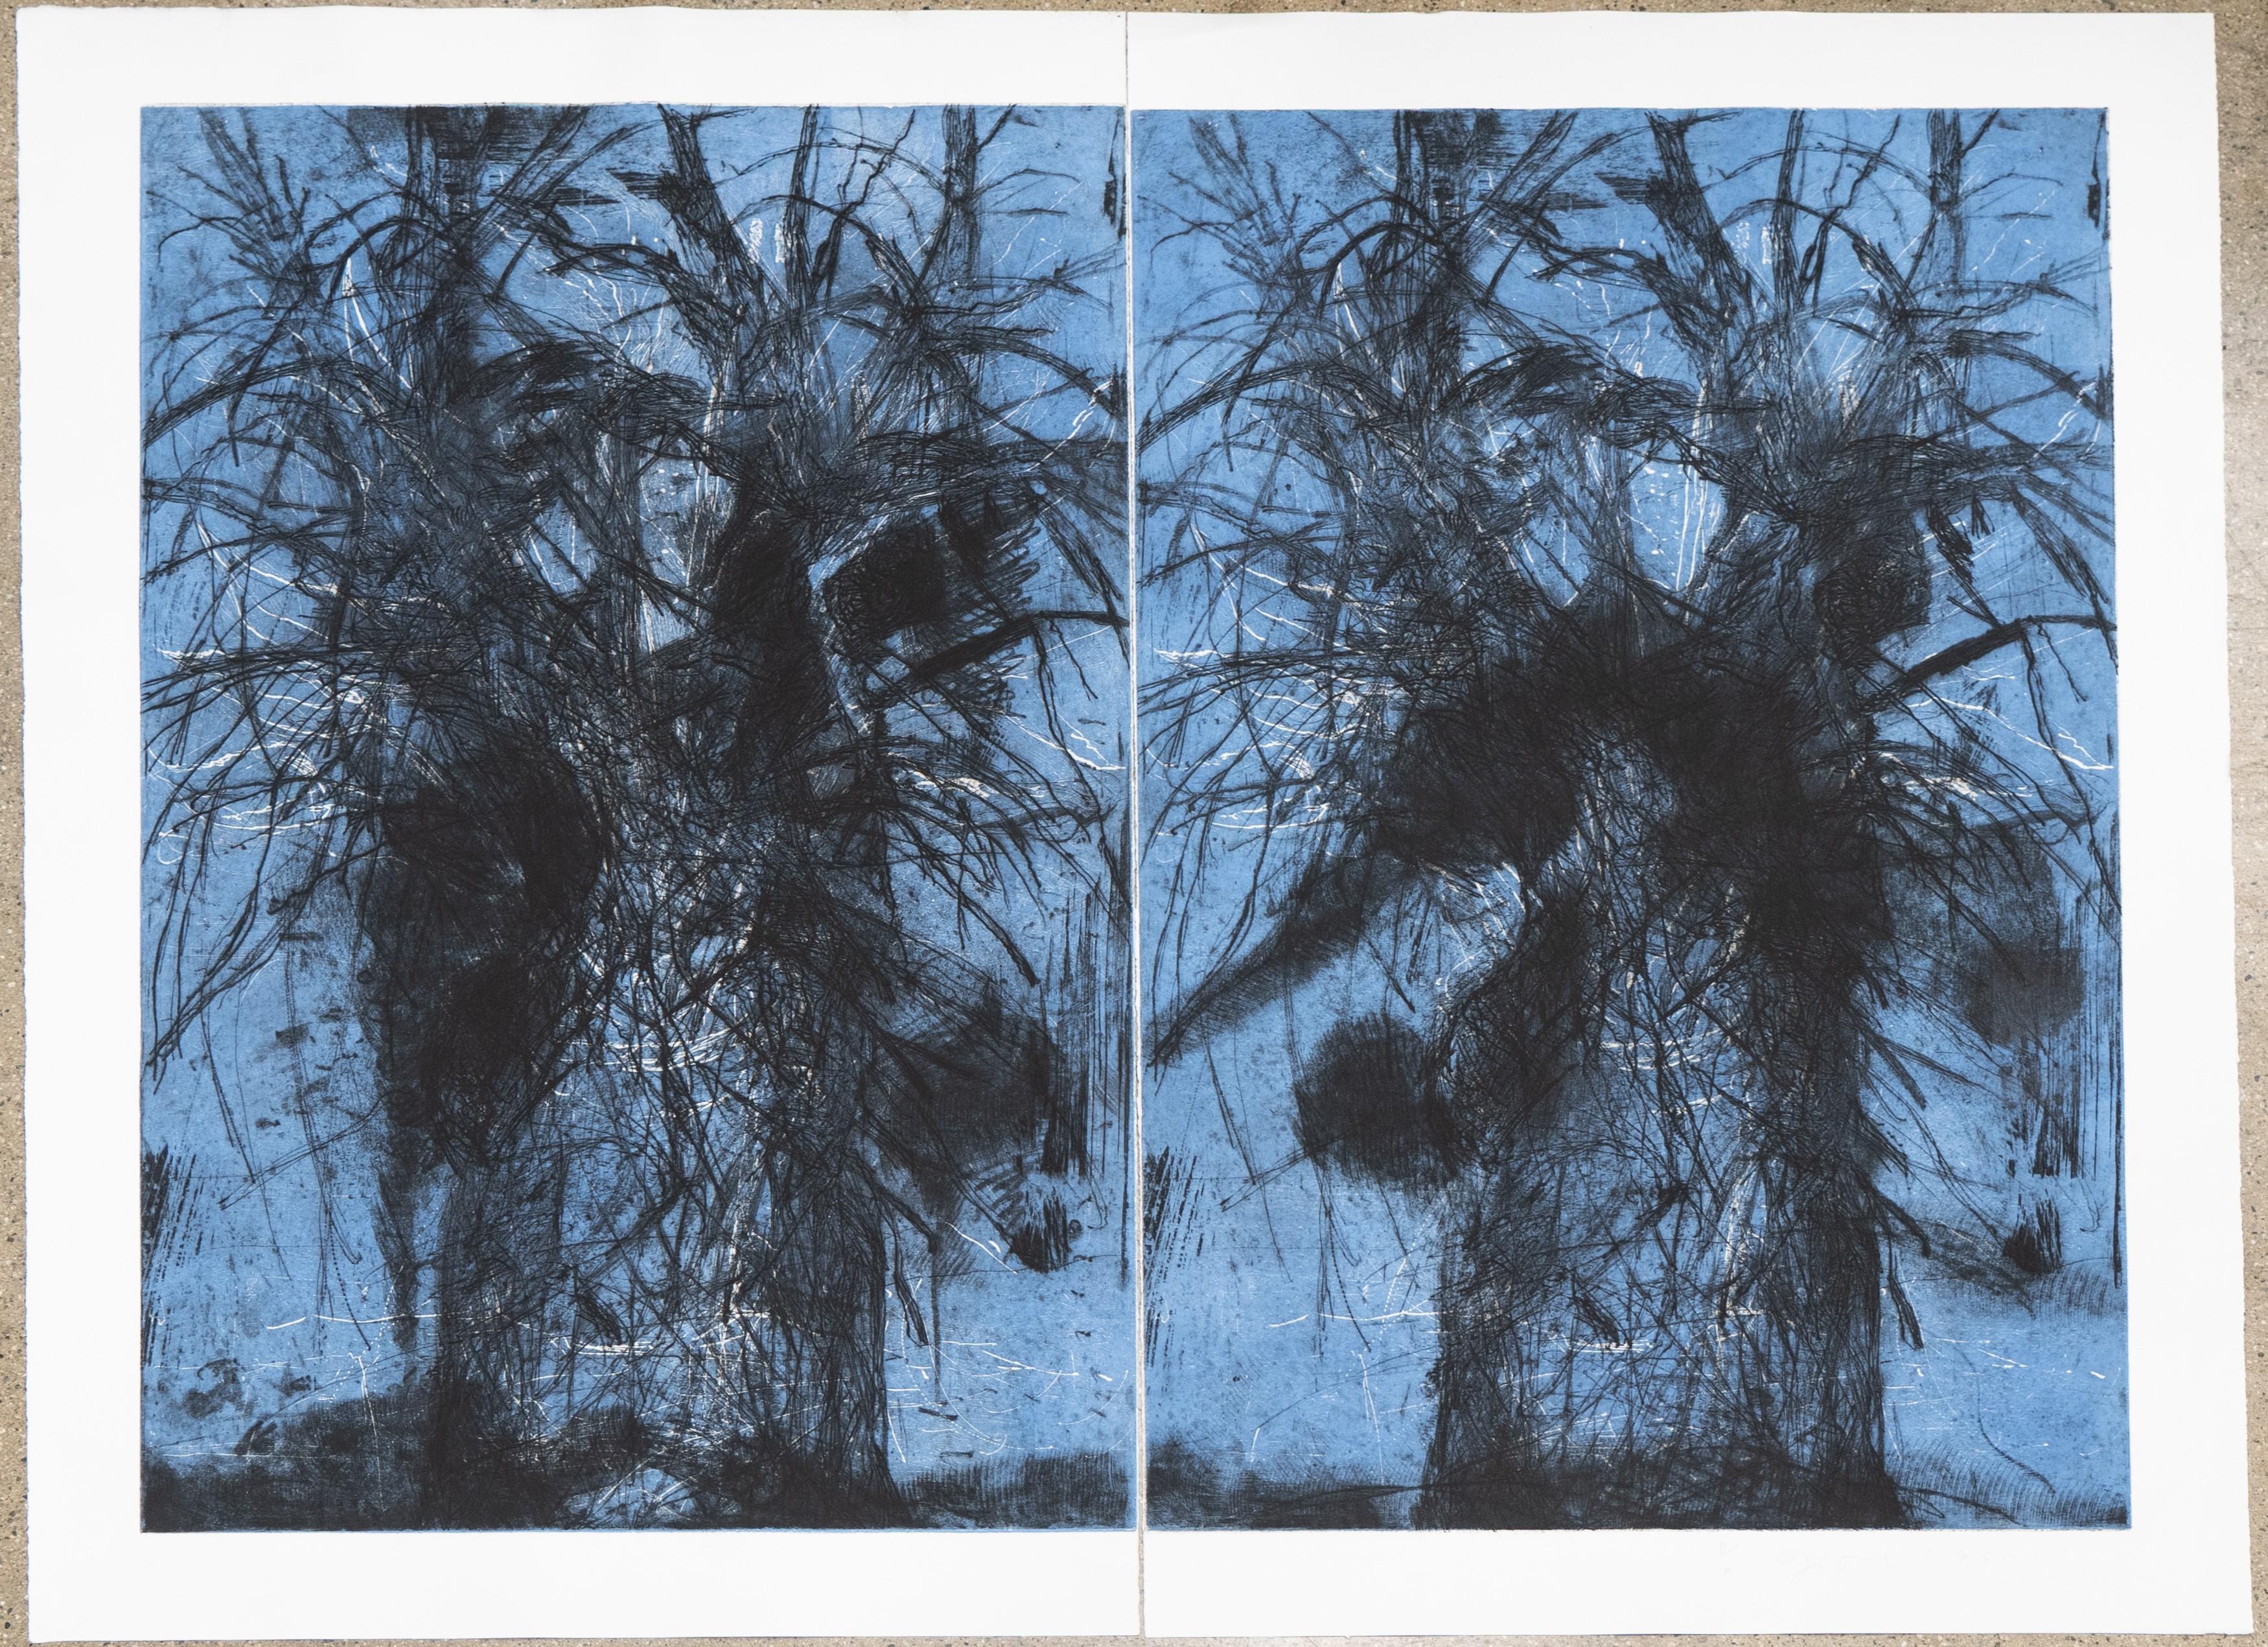 A set of two large etchings by famed American artist Jim Dine (1935- ) titled 